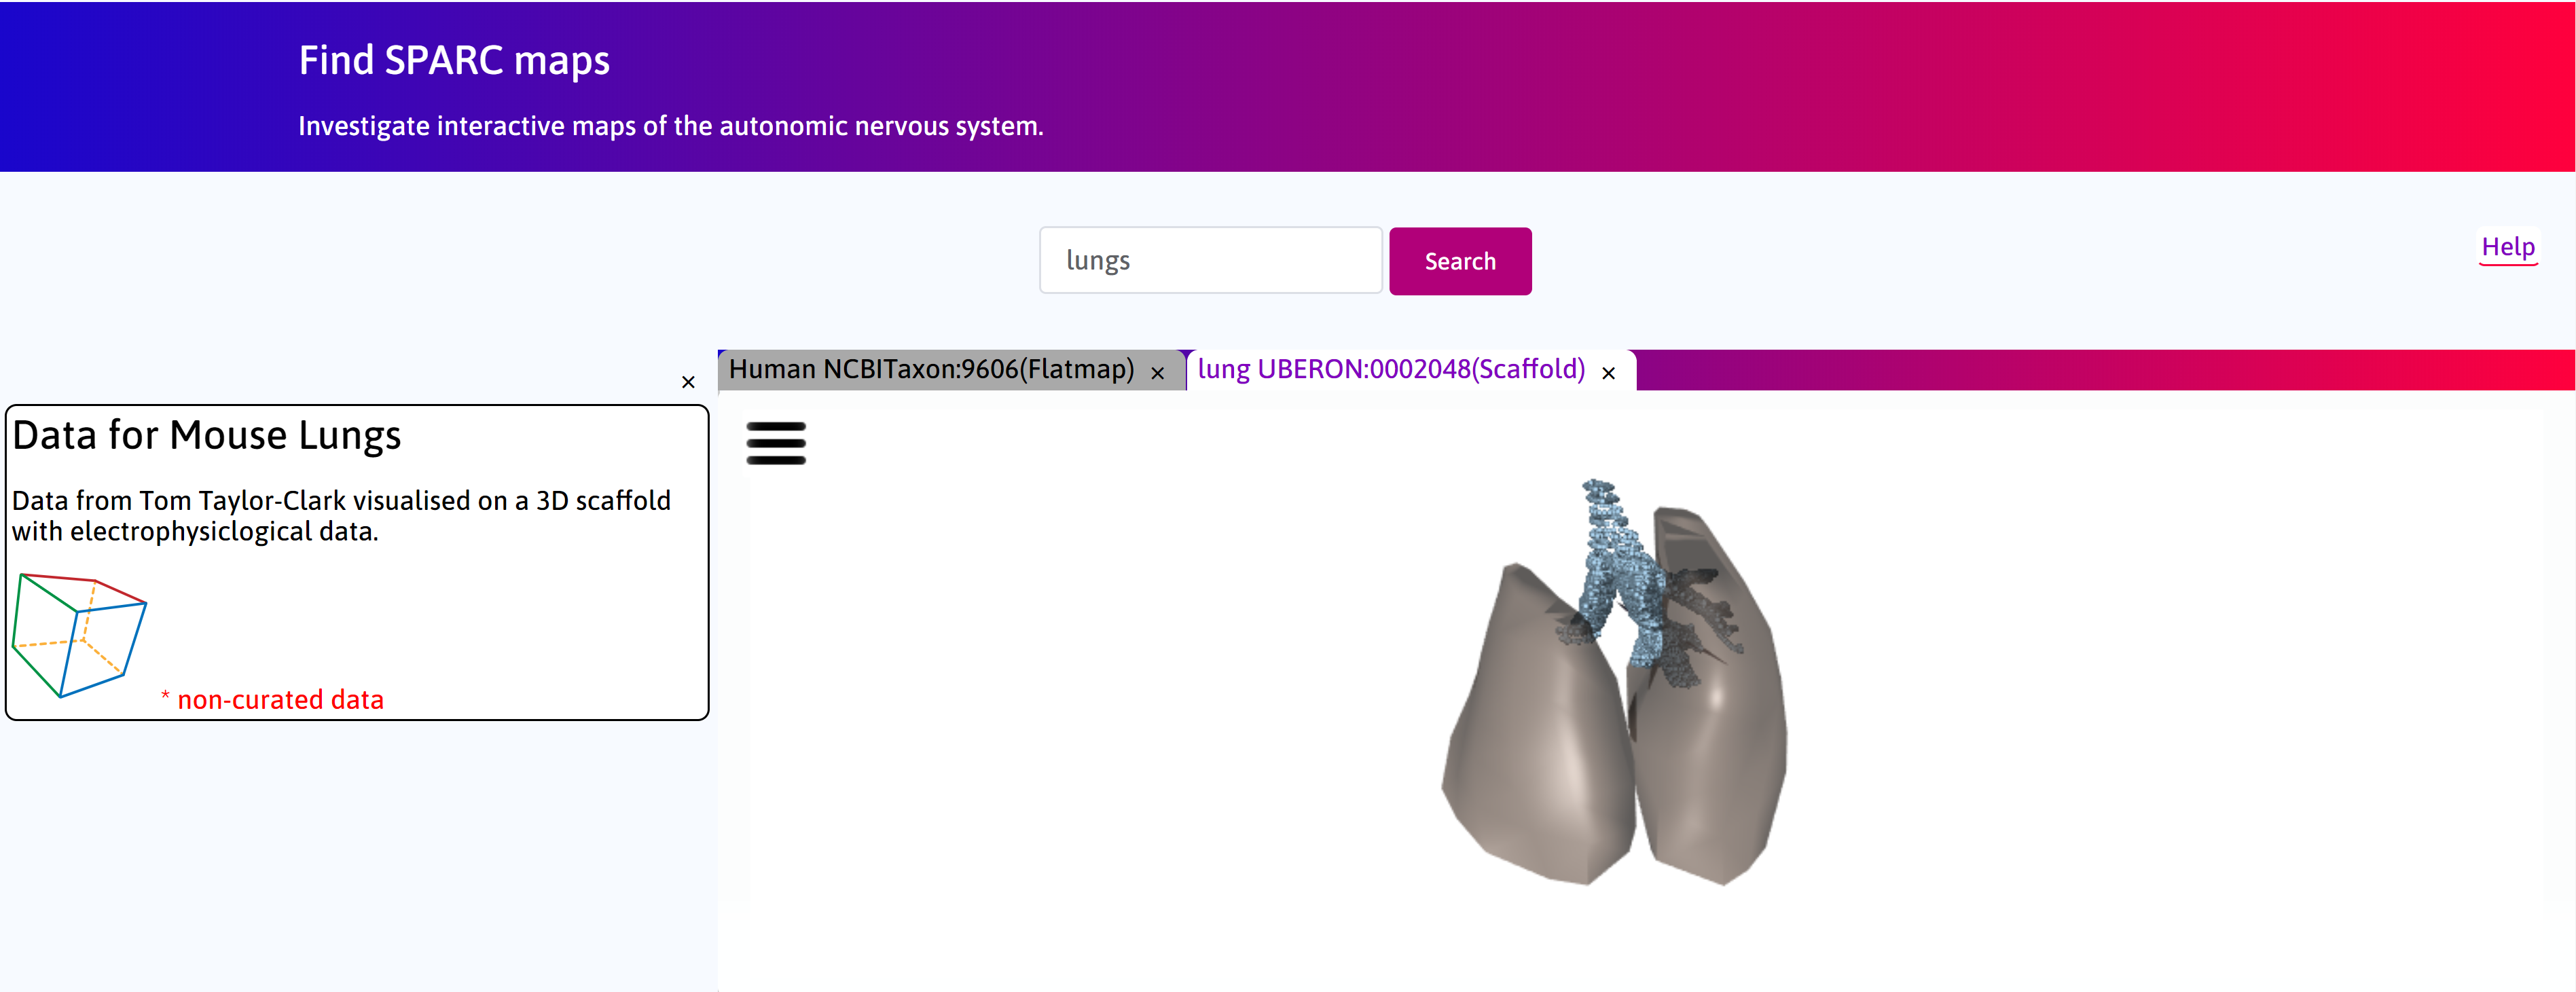 _images/lungs_03.png